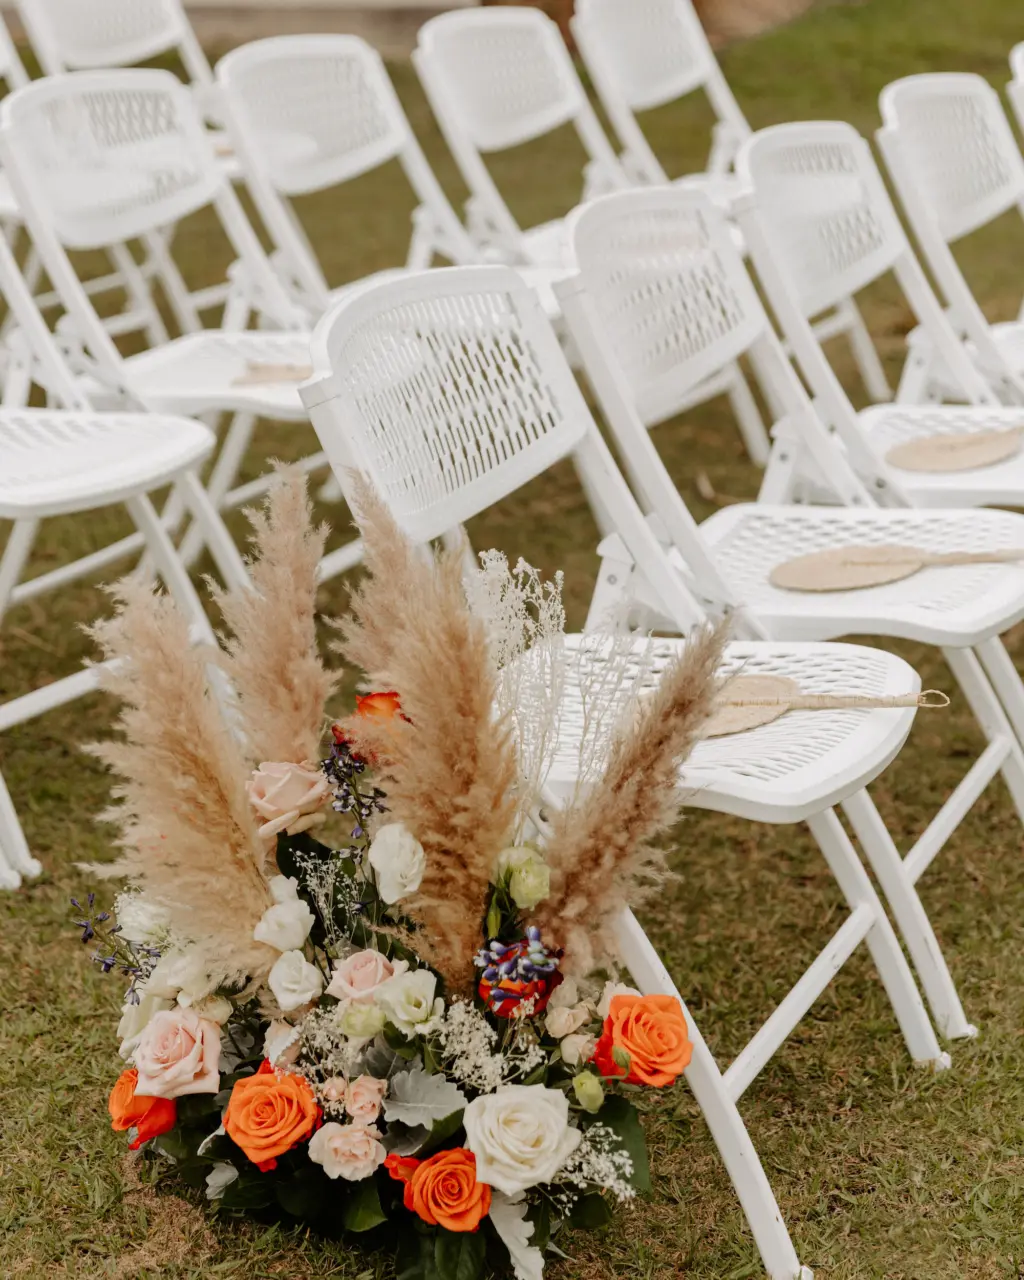 Orange, Pink, and White Roses, Pampas Grass, Baby's Breath, Carnations, and Greenery Boho Floral Aisle Arrangement Ideas | Wedding Guest Fan Inspiration